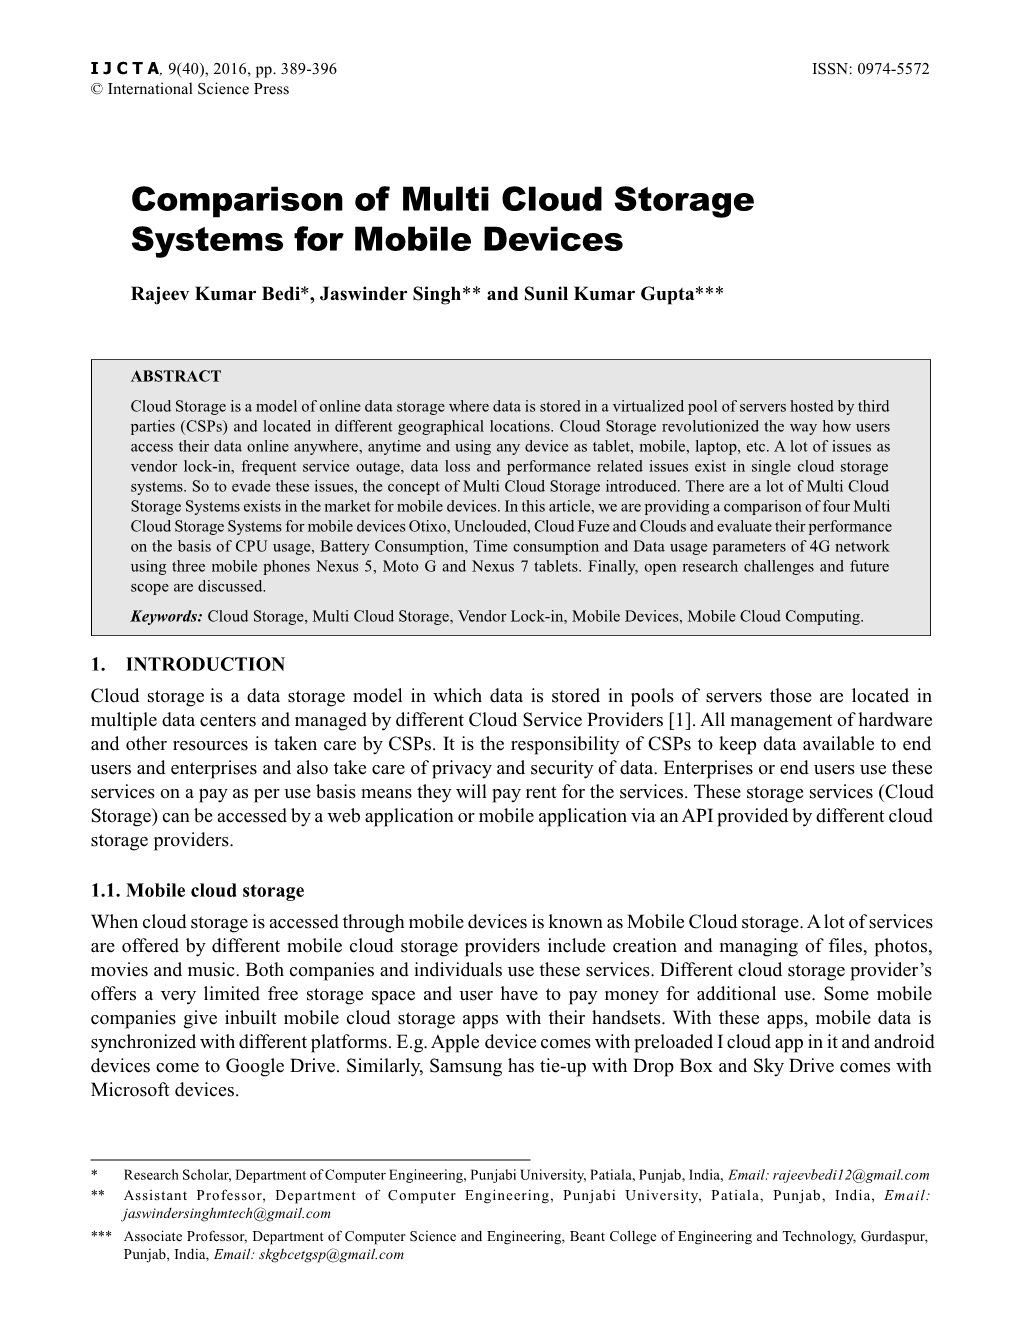 Comparison of Multi Cloud Storage Systems for Mobile Devices